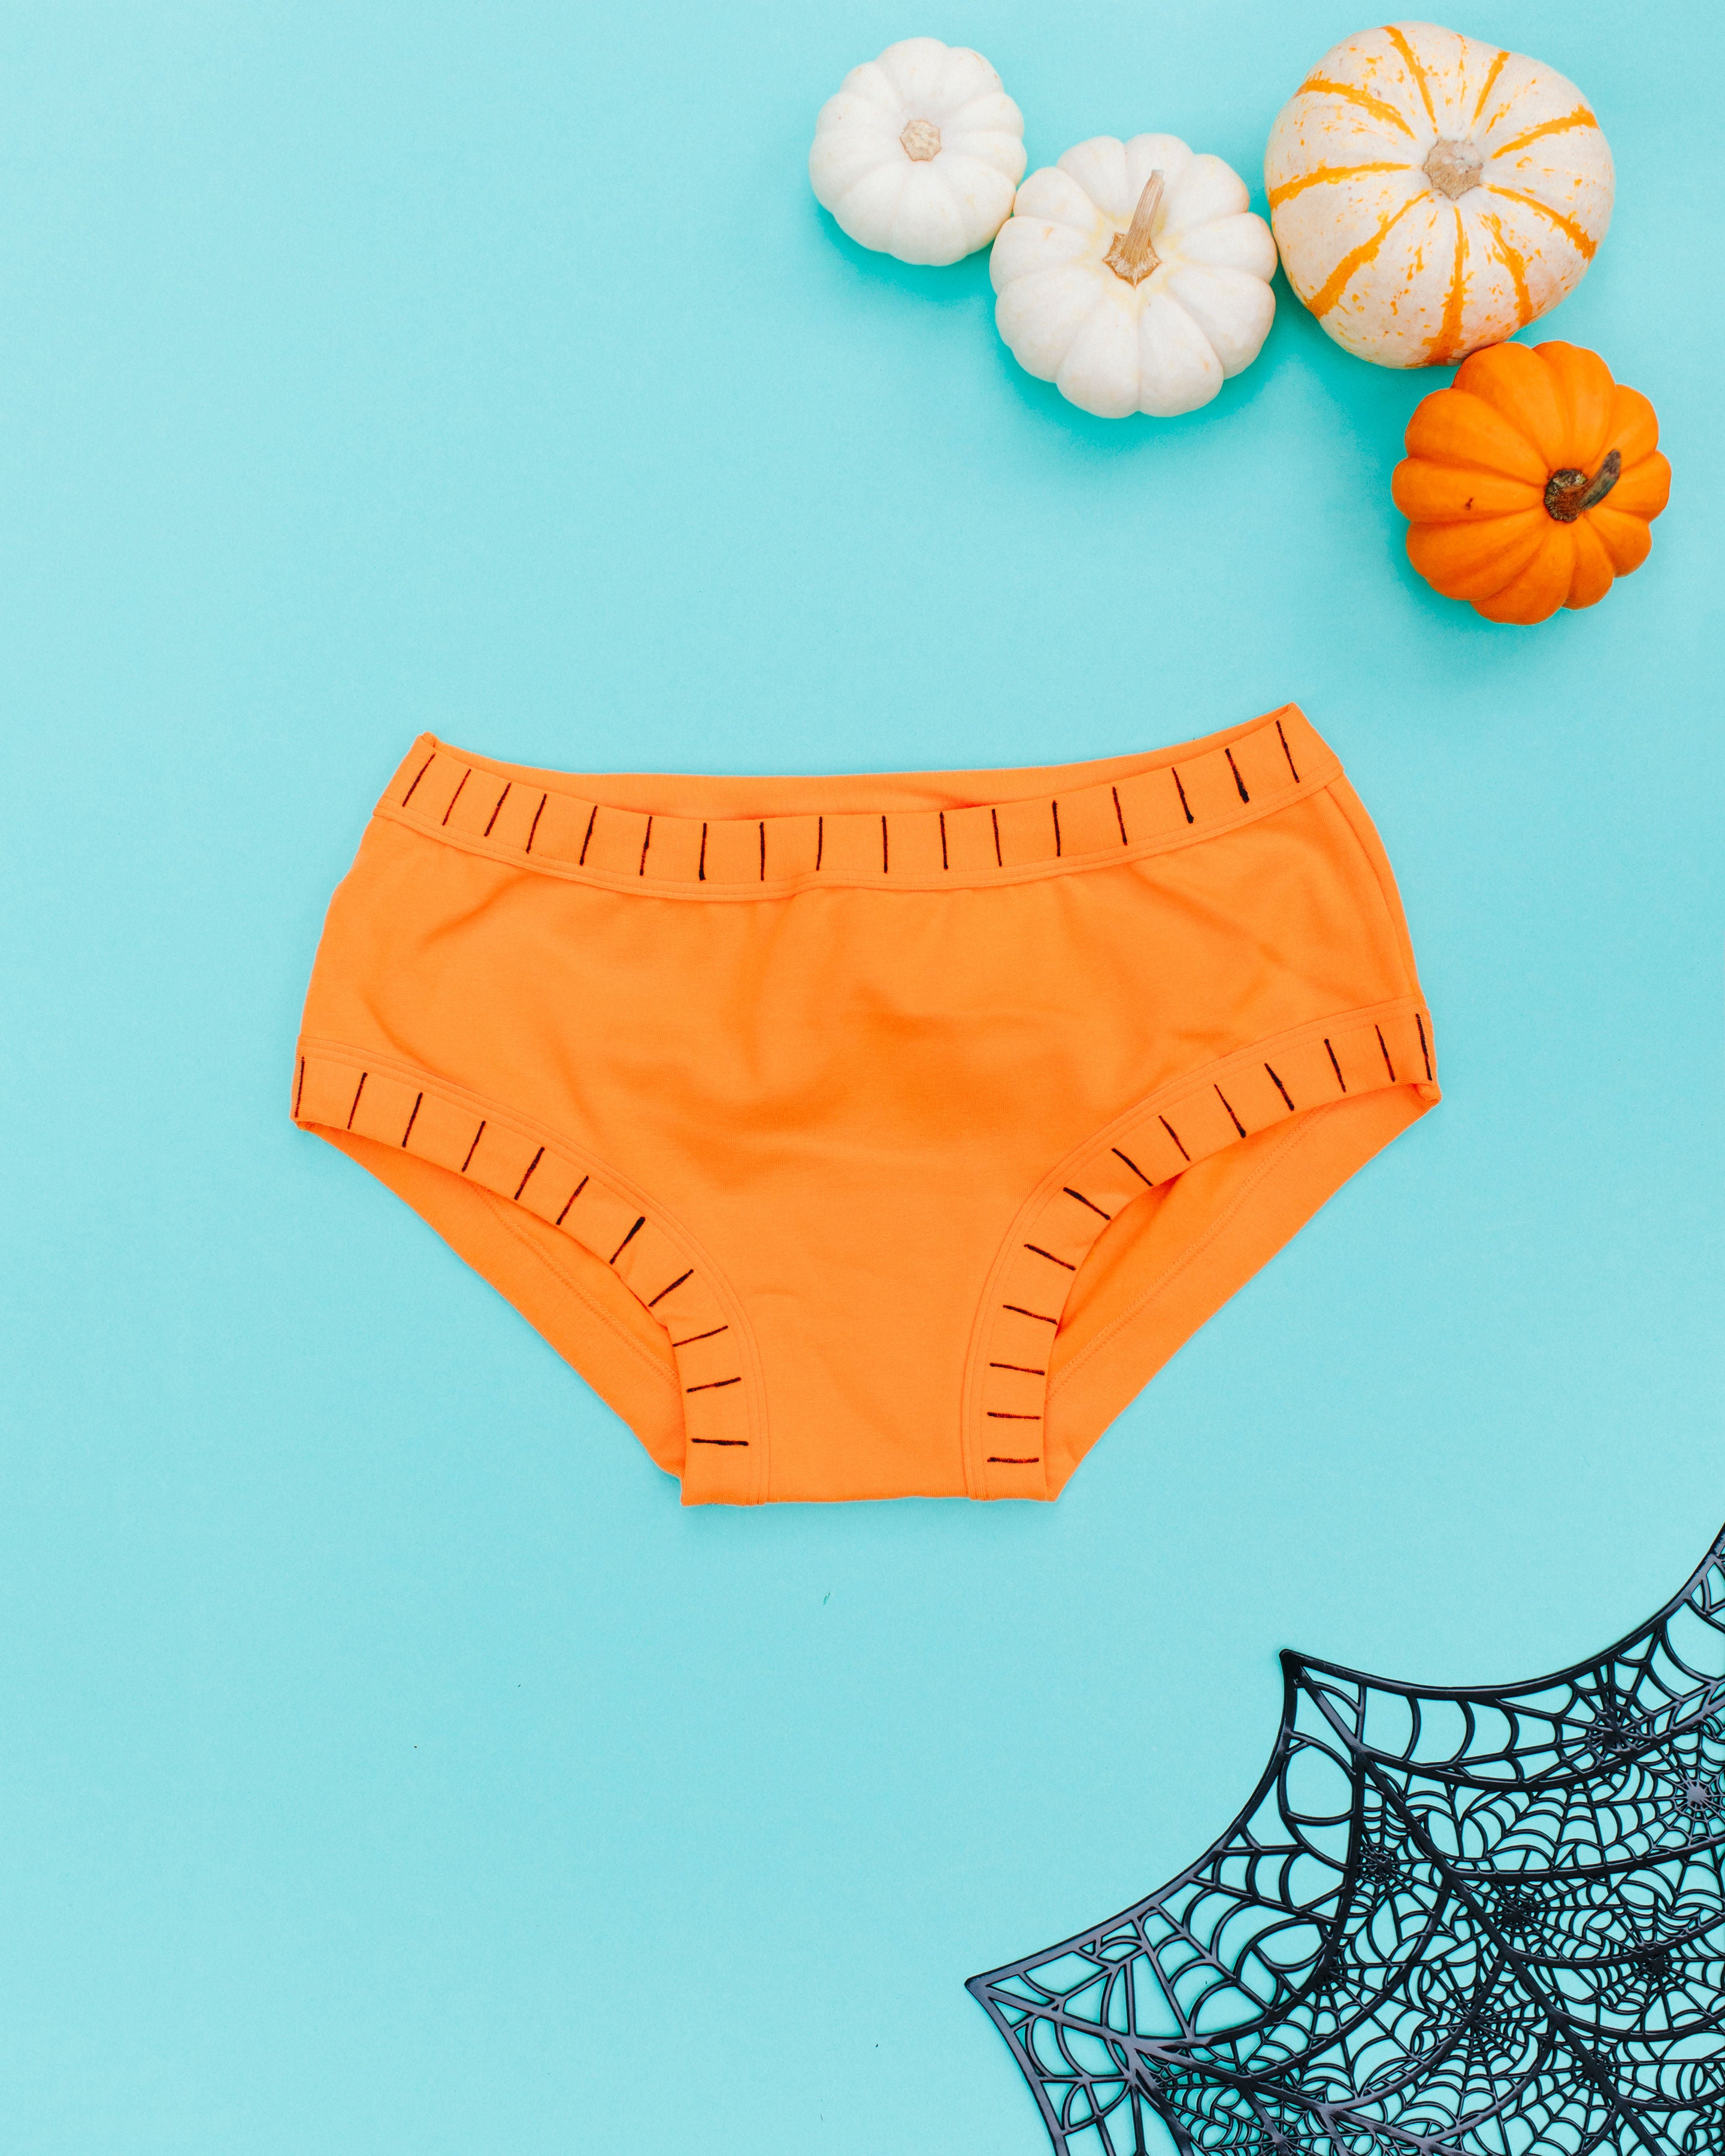 Flat lay of Thunderpants Hipster style underwear in Oregon Sunstone.